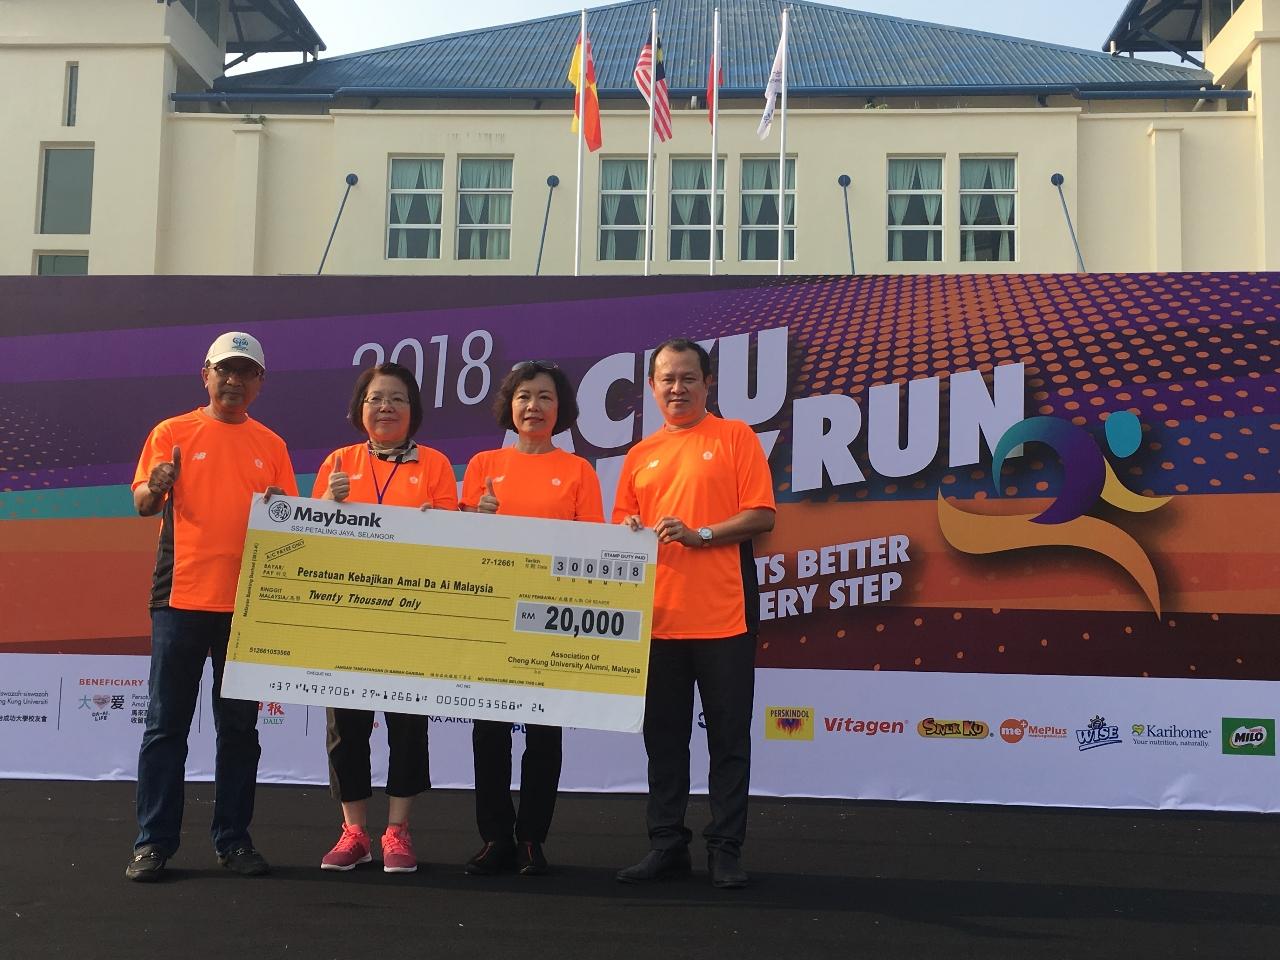 Representative Anne Hung (second from right) attends “ACKU Charity Run” held by Taiwan National Cheng Kung University Alumni Association and witnesses its donation ceremony.
